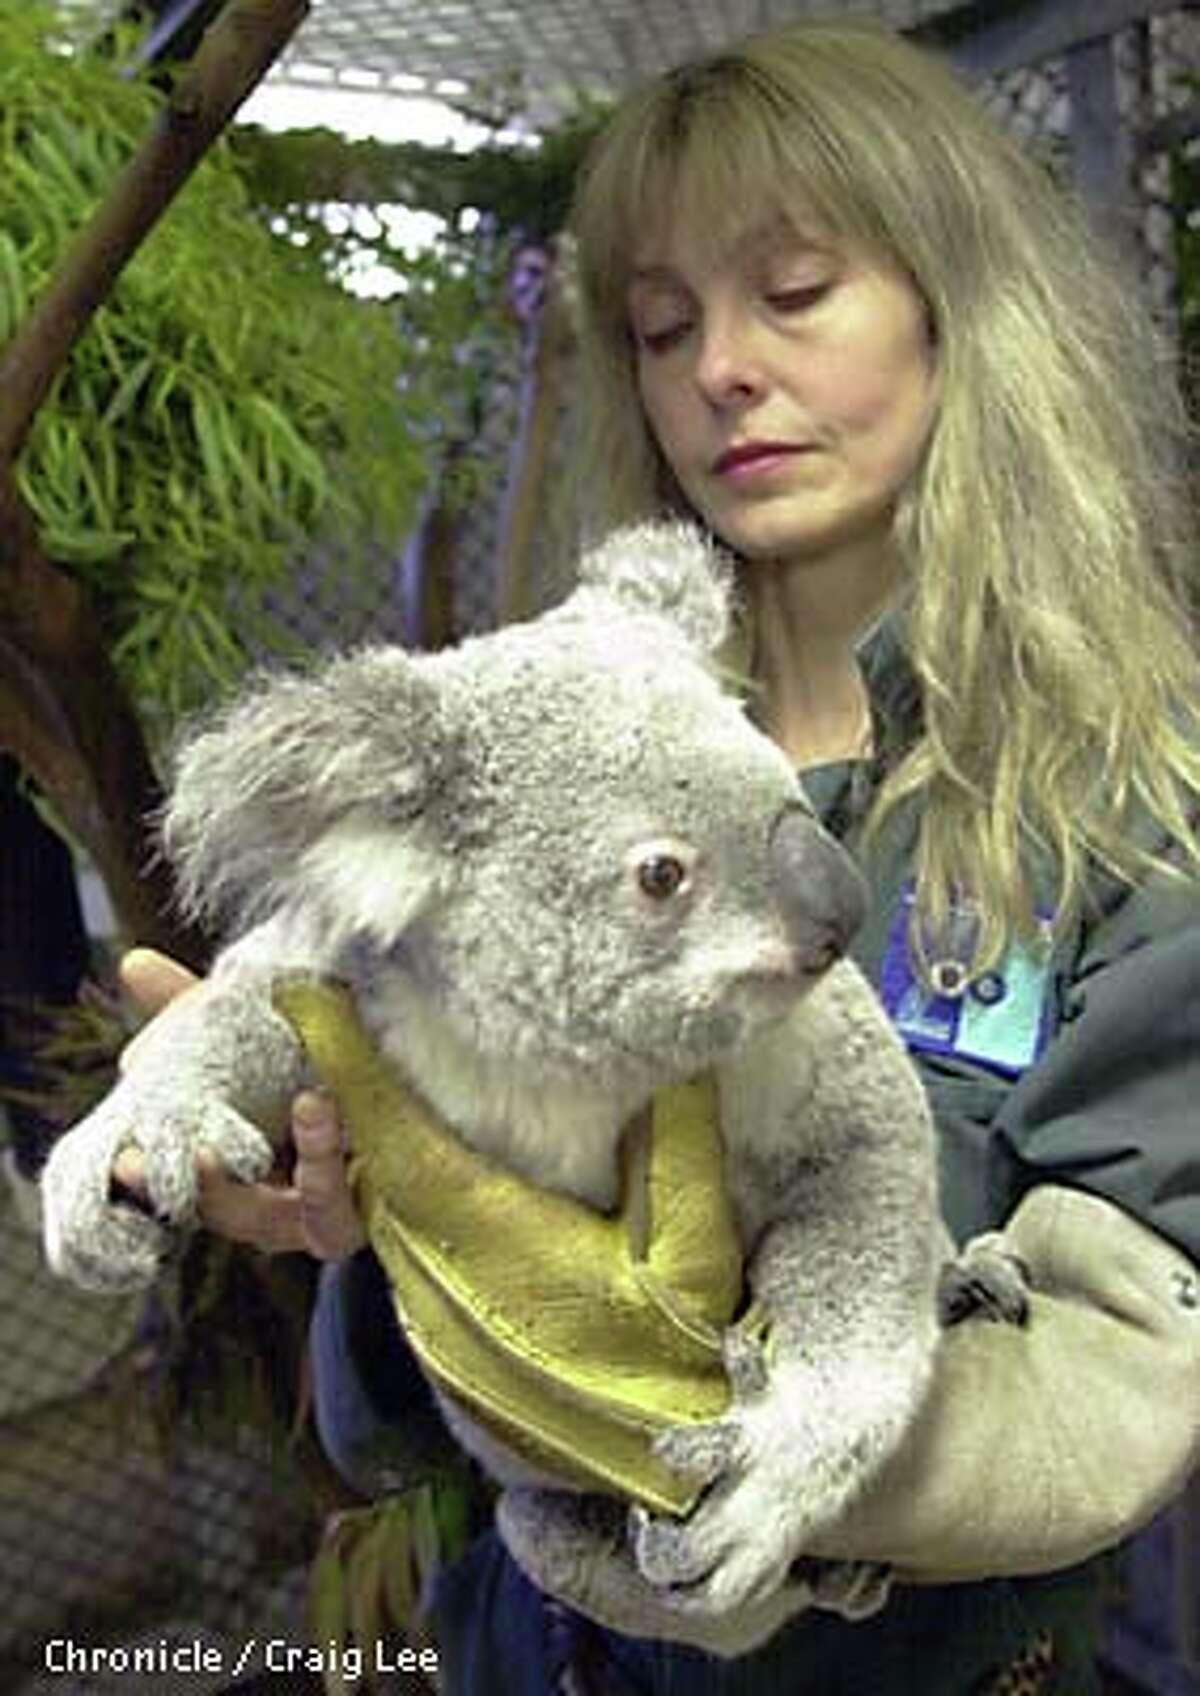 Zookeeper Nancy Rumsey embraced Leanne, one of the koalas stolen in San Francisco. Chronicle photo by Craig Lee